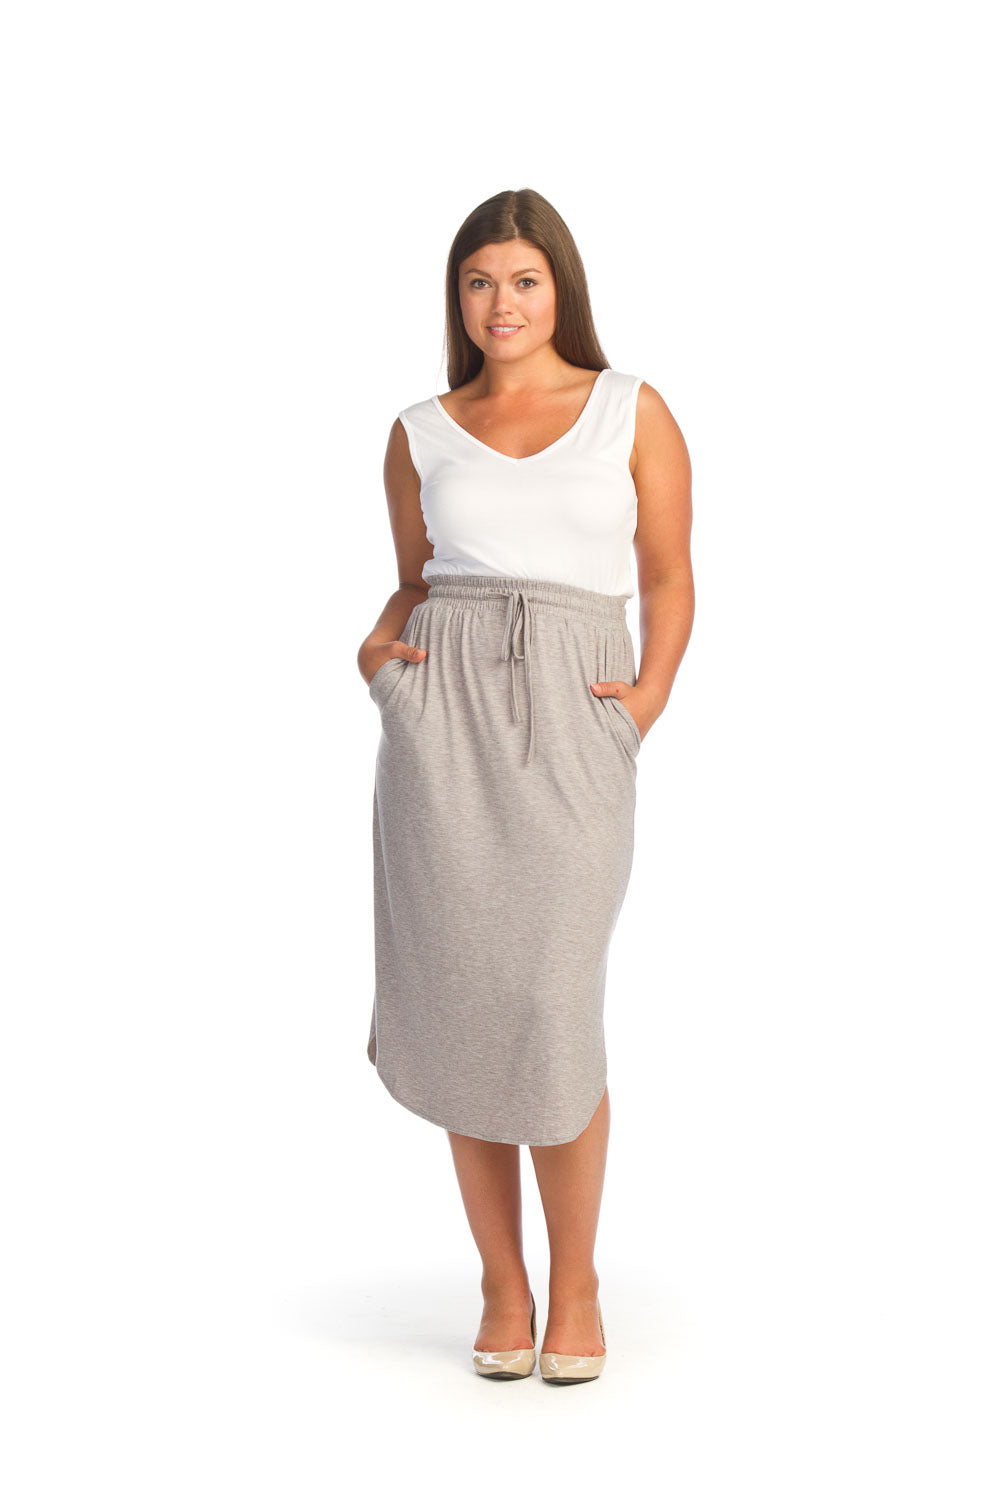 PS-14902 - HEATHERED KNIT SKIRT WITH POCKETS